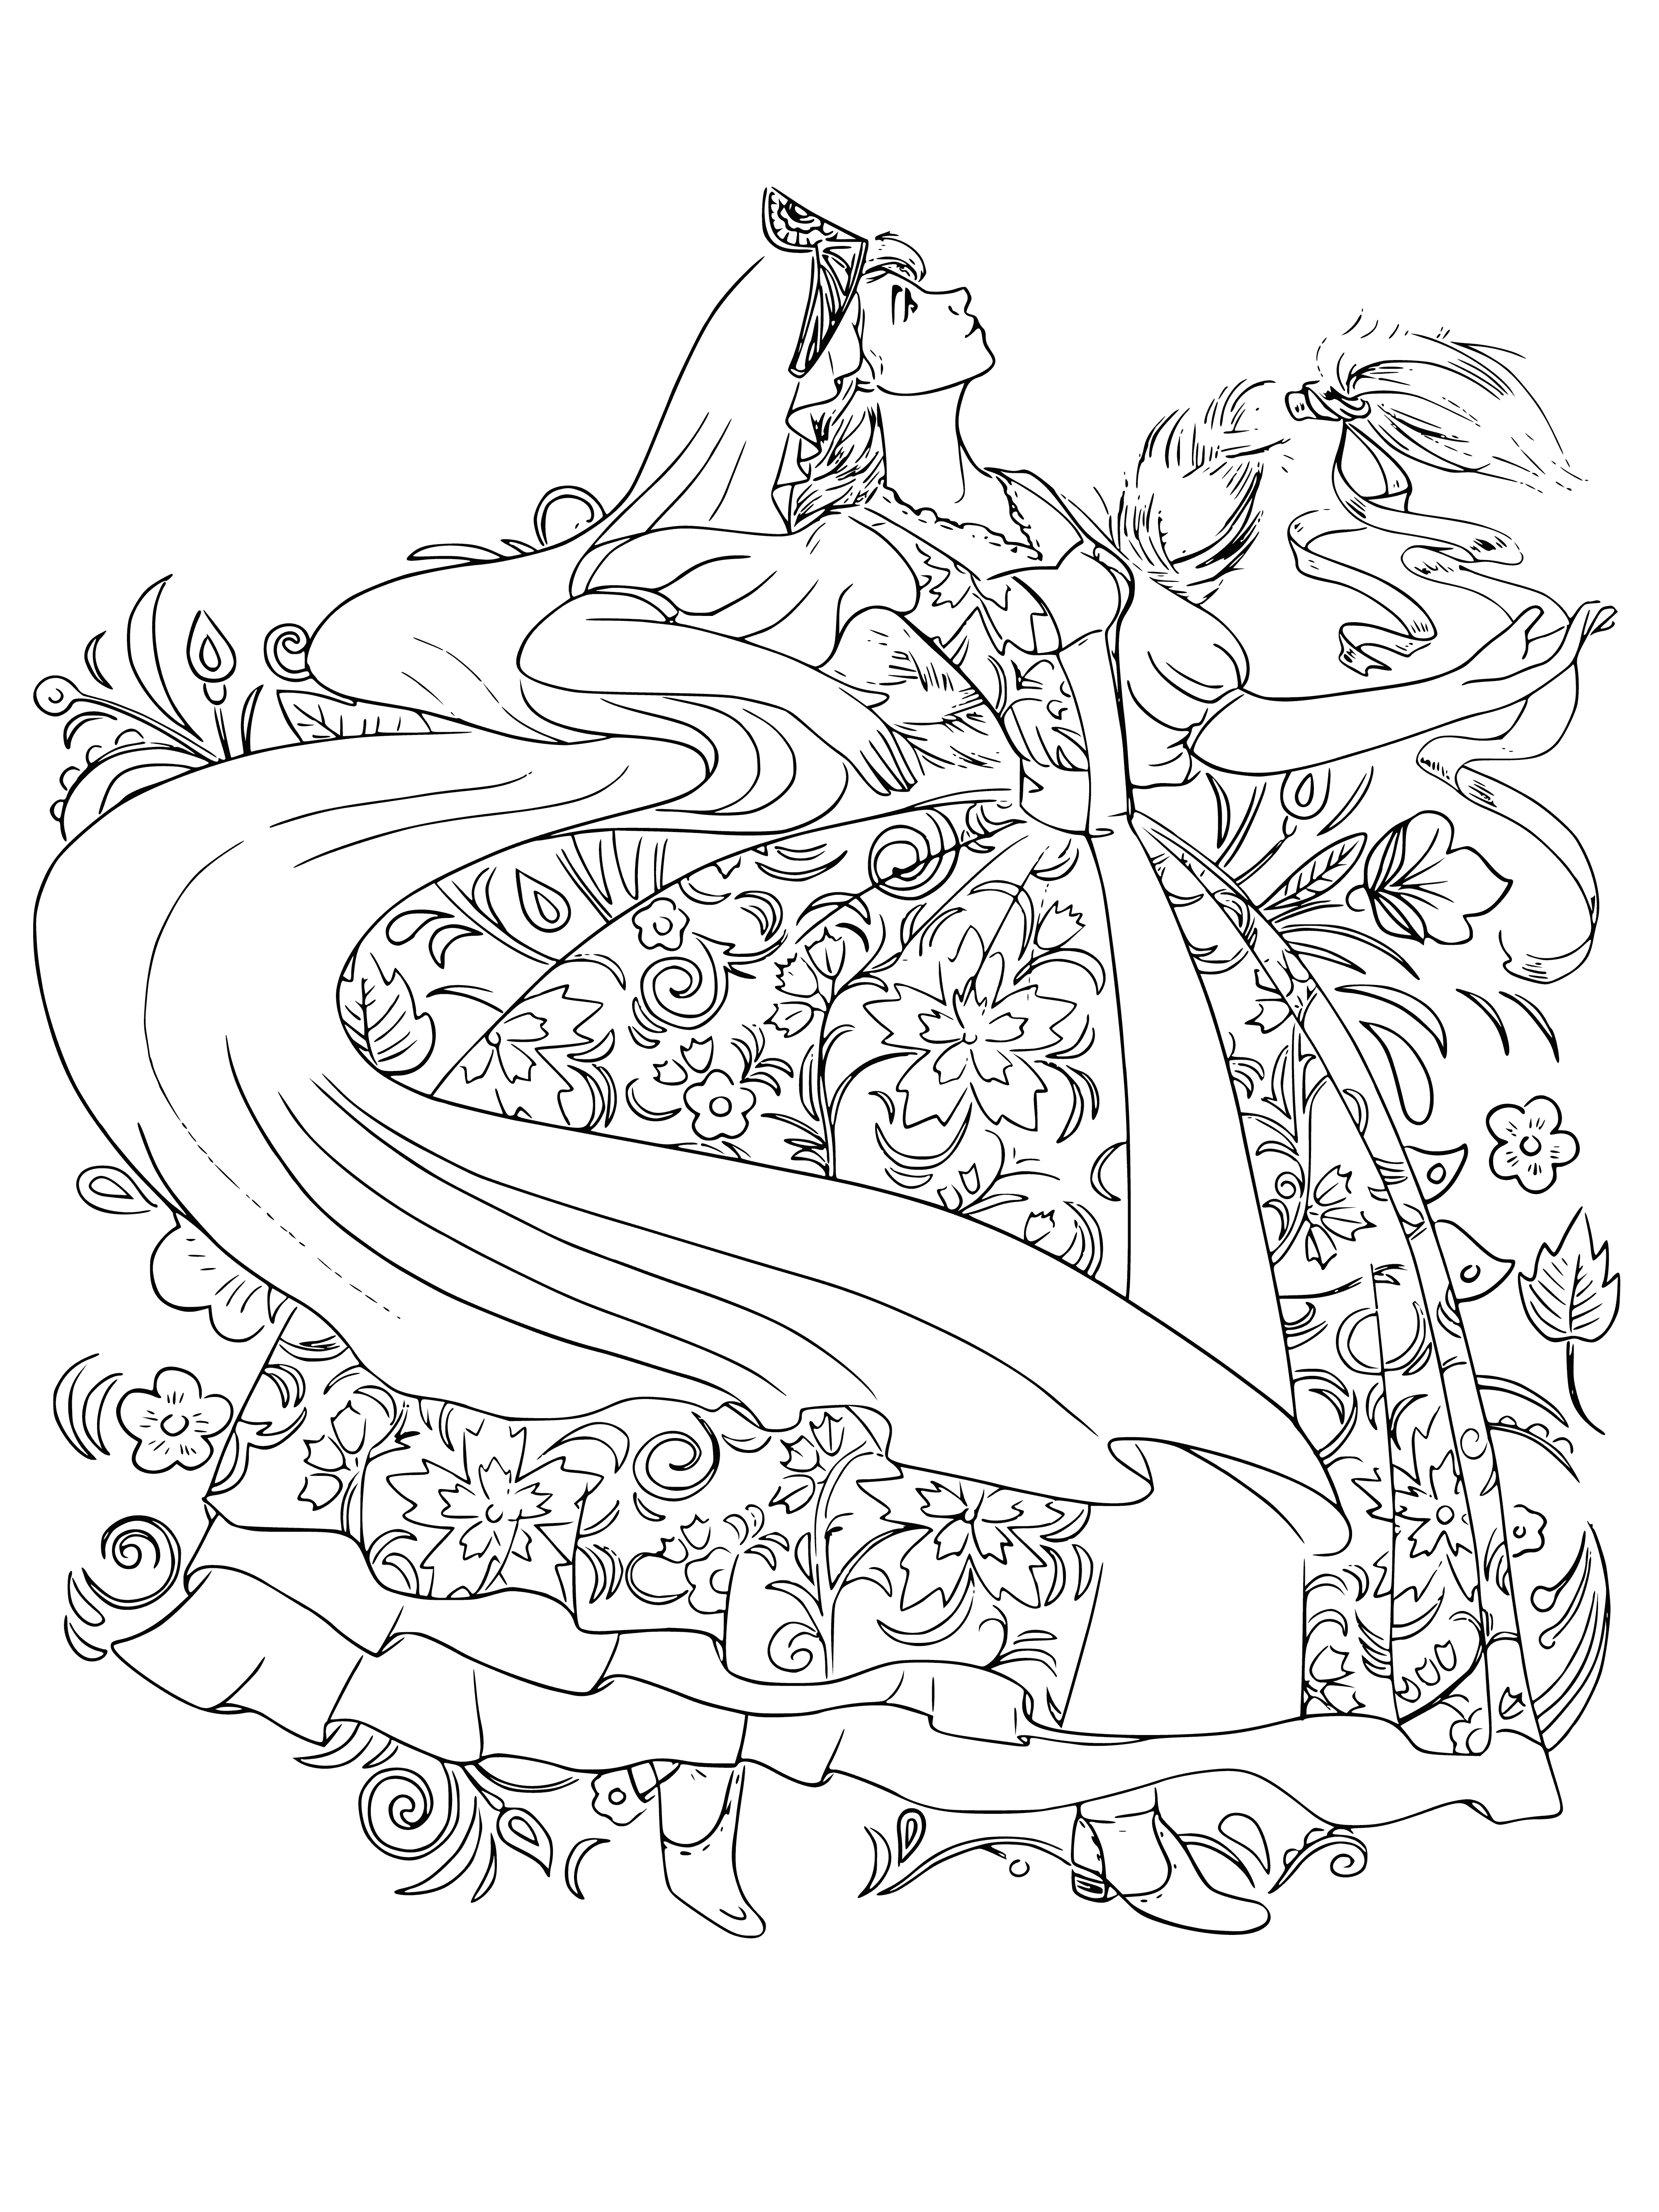 coloring page: Girl in white dress twirling surrounded by flowers, plants and butterfly.